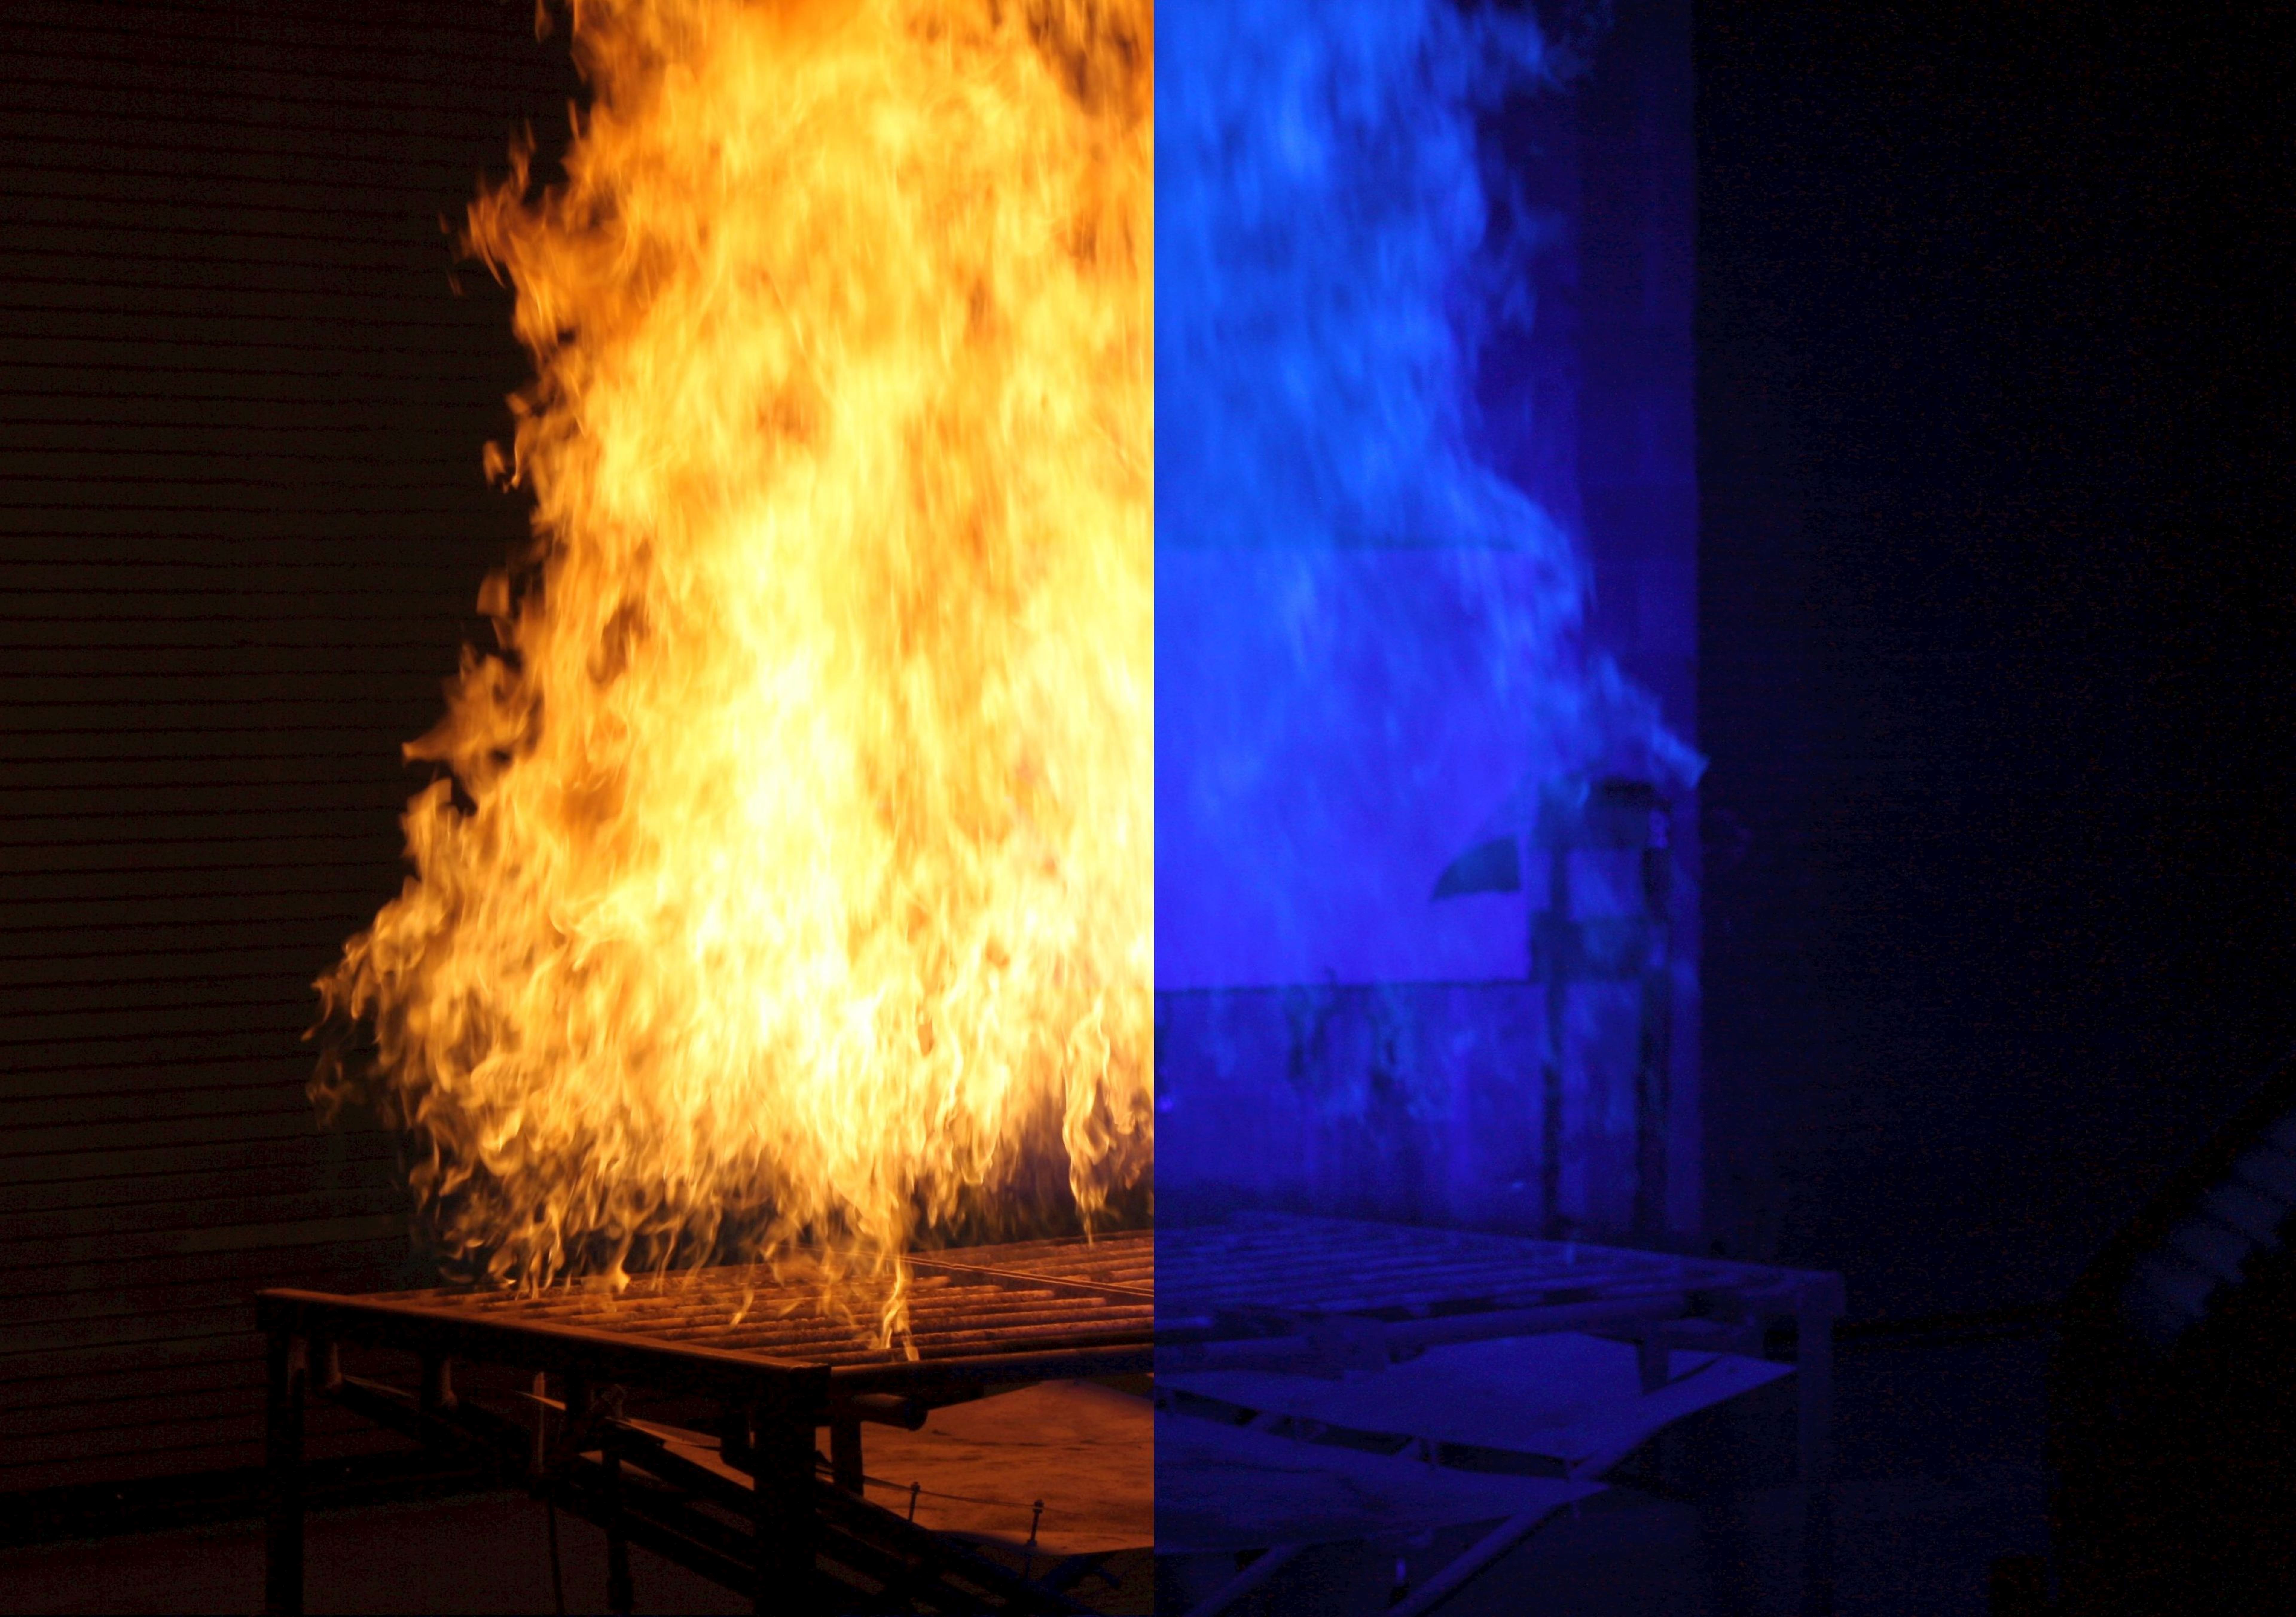 NIST Unblinded Me with Science: New Application of Blue Light Sees Through  Fire